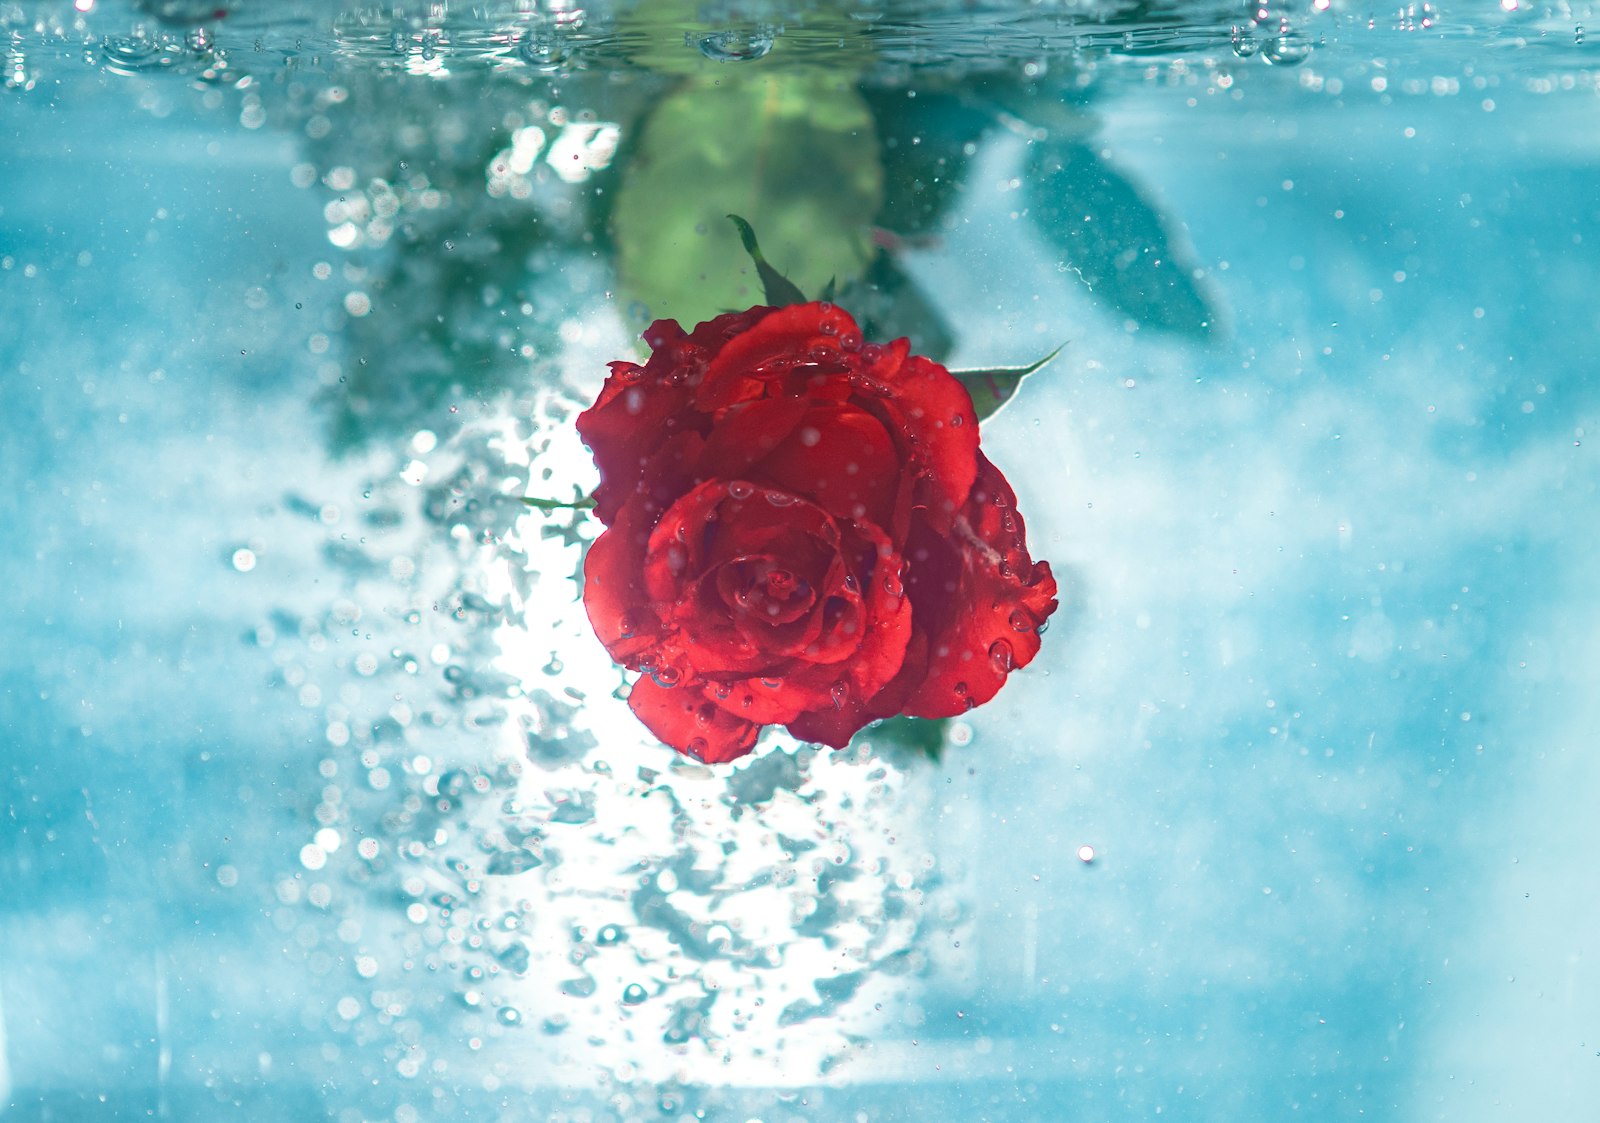 Panasonic Leica DG Nocticron 42.5mm F1.2 ASPH OIS sample photo. Red flower under water photography